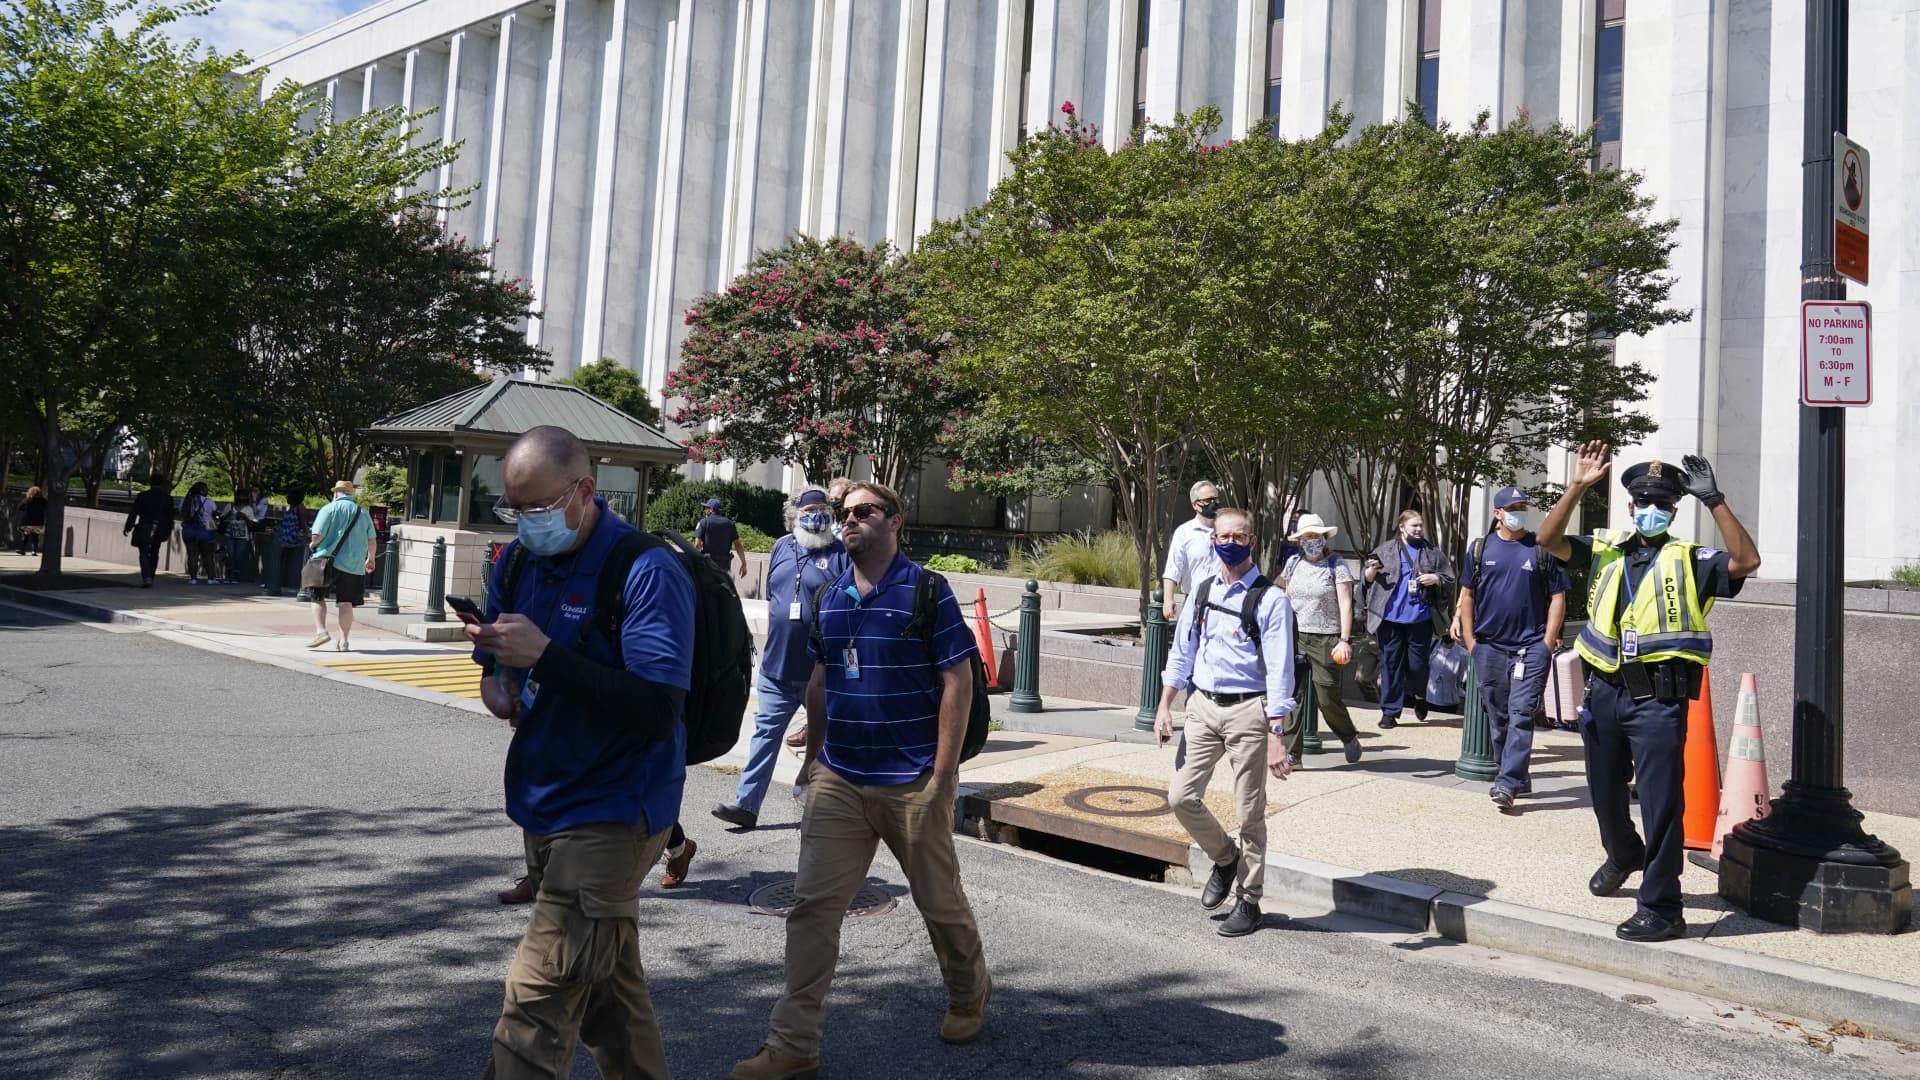 People are evacuated from the James Madison Memorial Building, a Library of Congress building, in Washington on Thursday, Aug. 19, 2021, as law enforcement investigate a report of a pickup truck containing an explosive device near the U.S. Capitol.